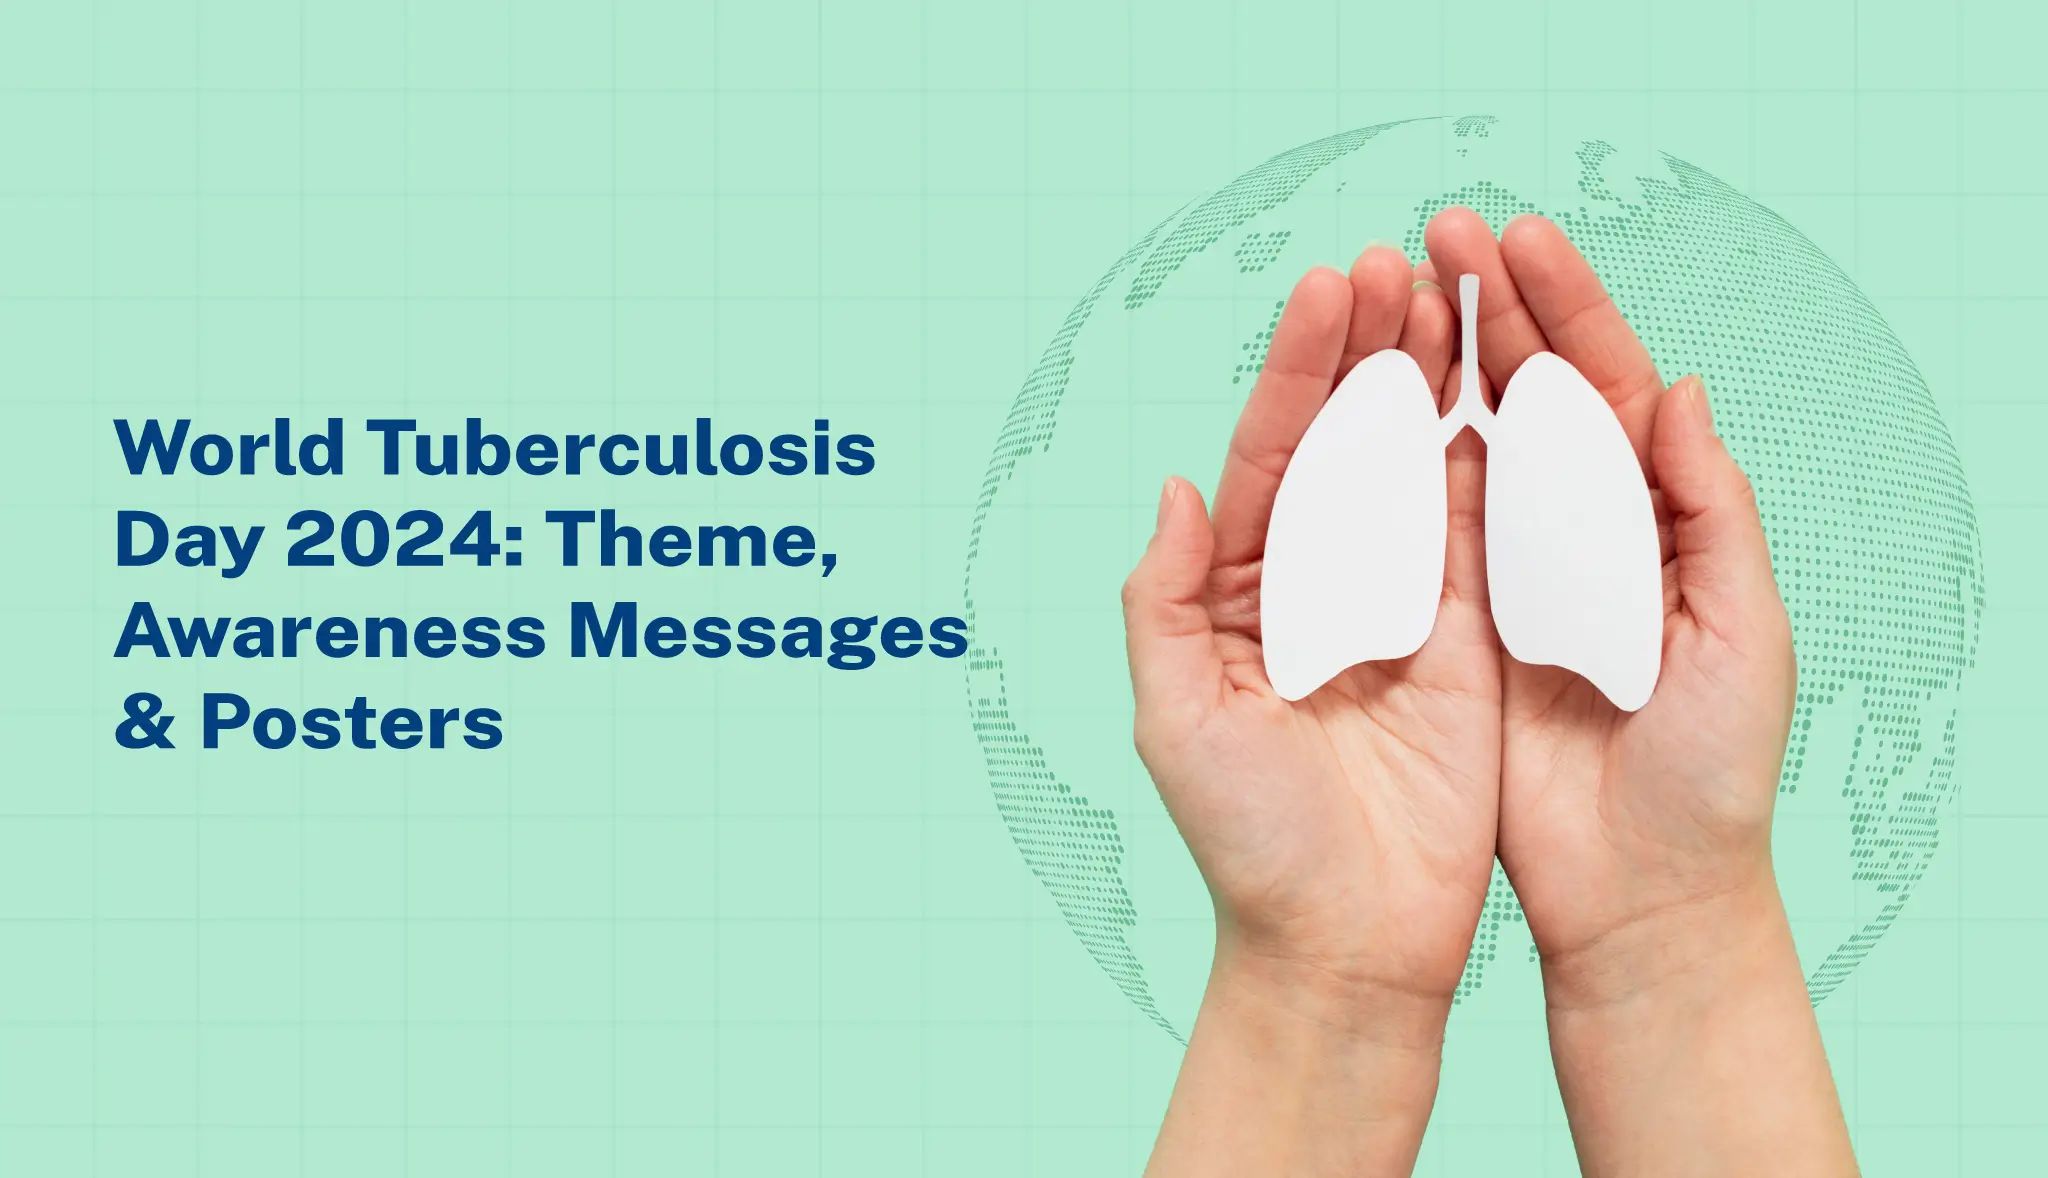 World Tuberculosis Day 2024: Theme, Awareness Messages & Posters - Postive